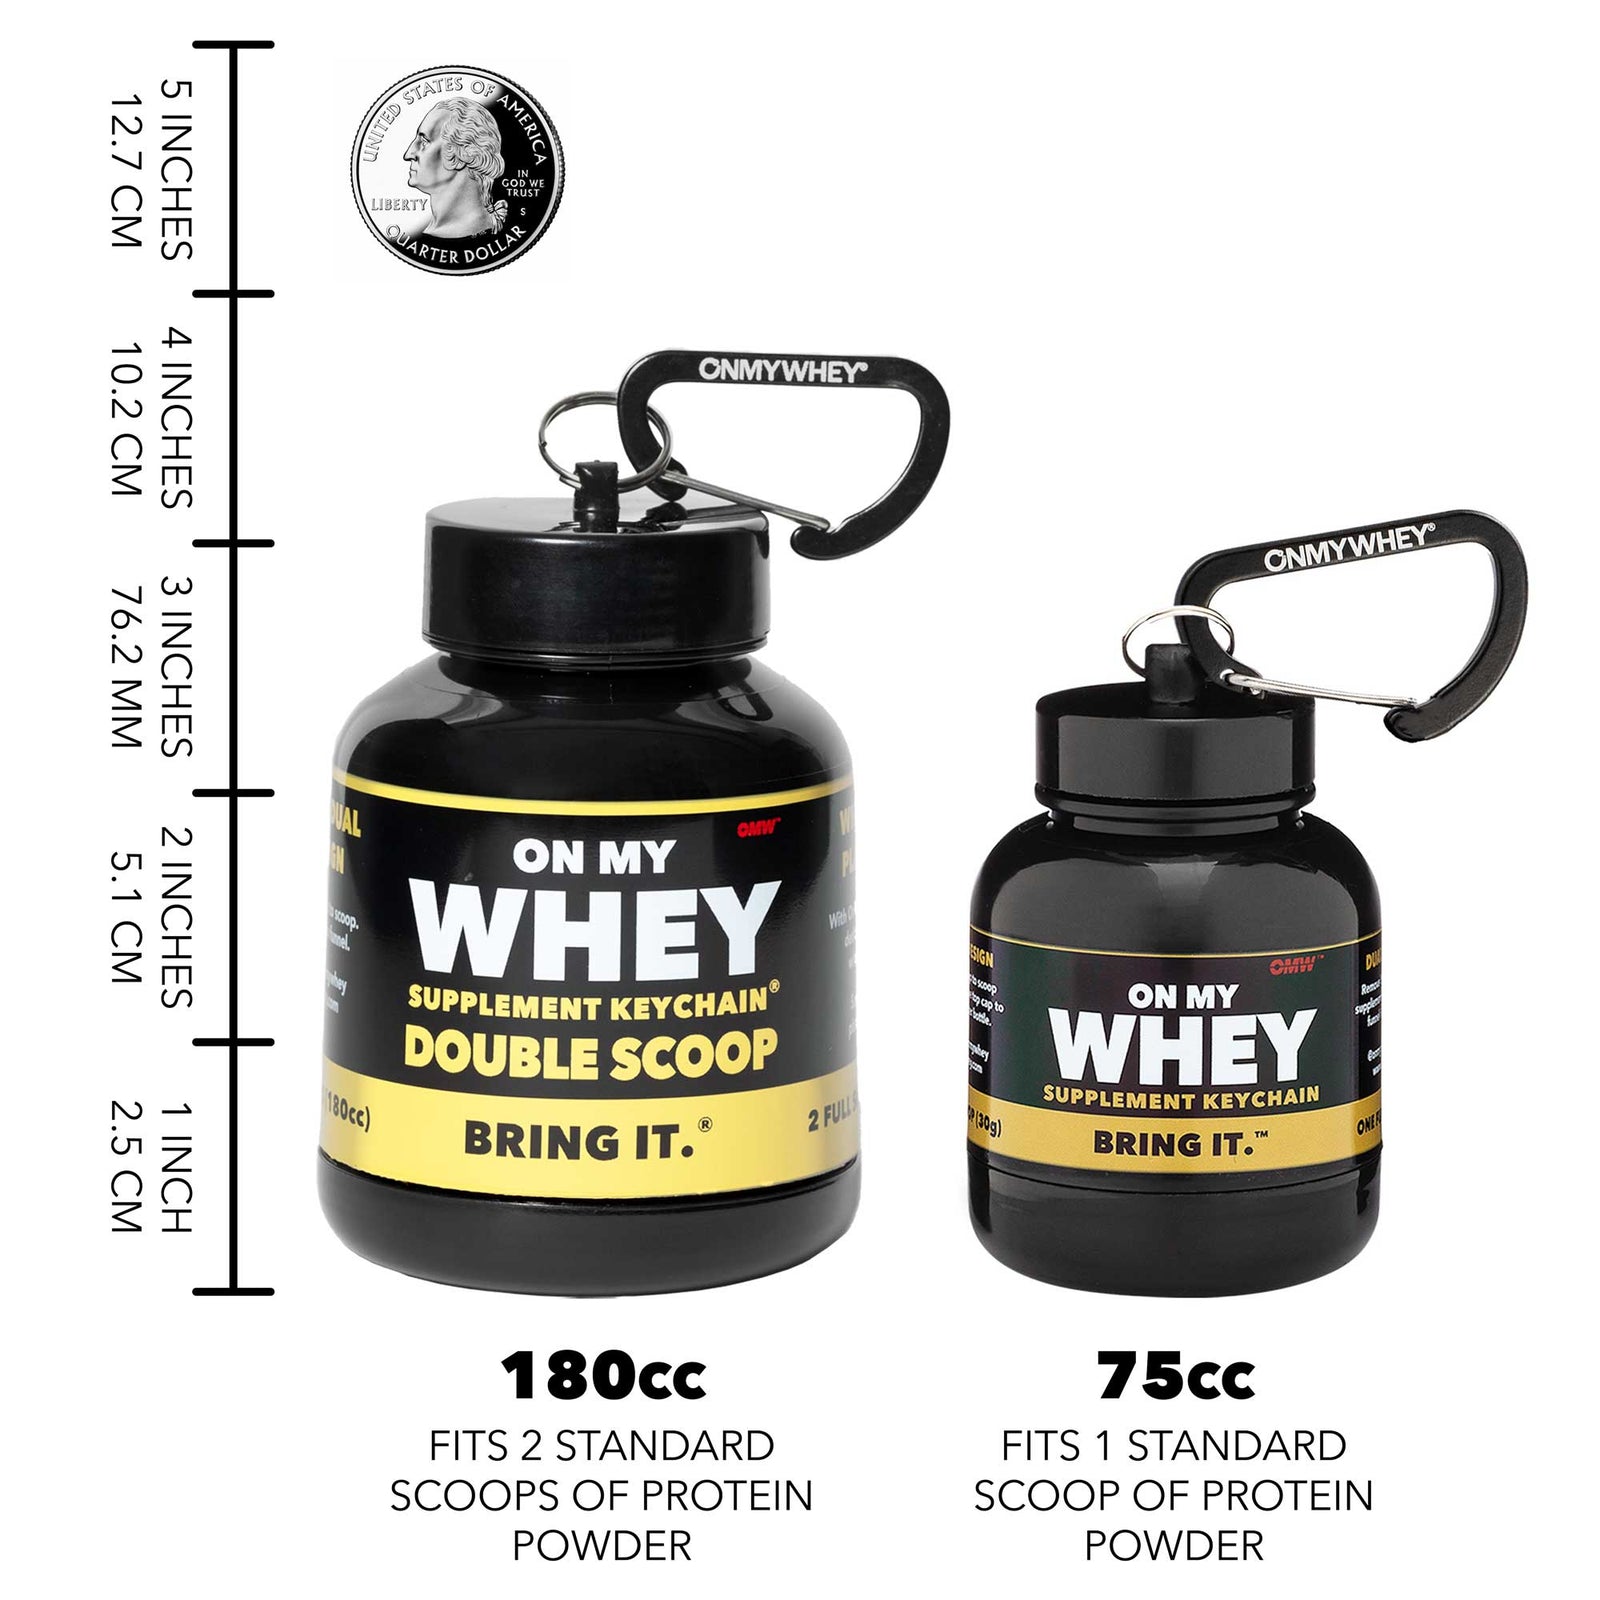 Fit. Protein Powder and Supplement Funnel Keychain